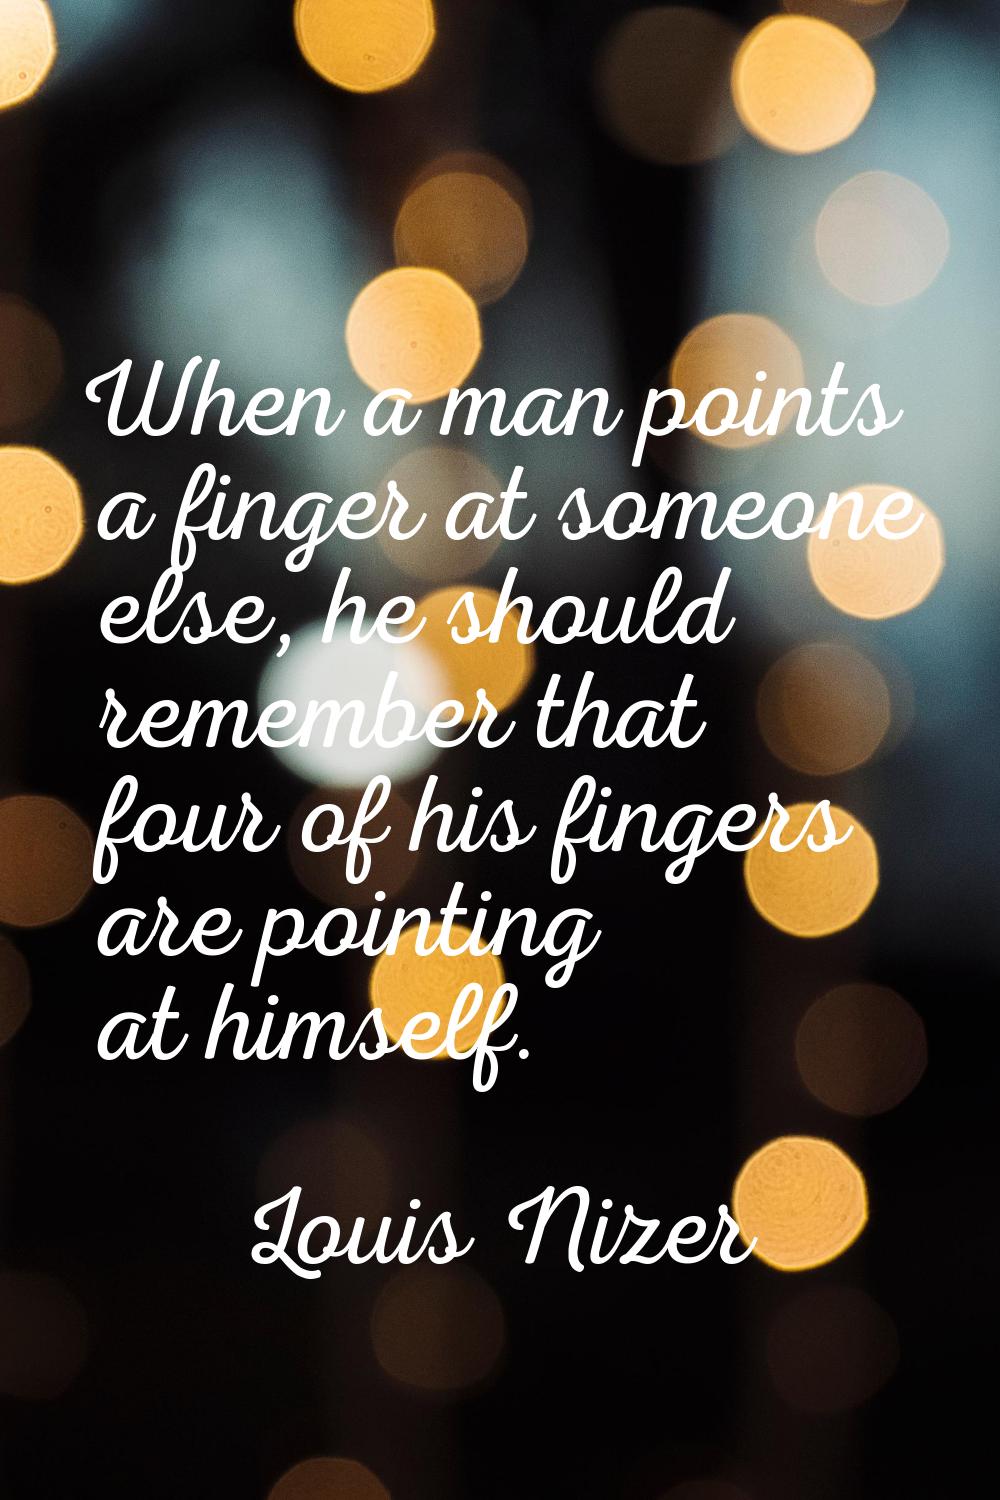 When a man points a finger at someone else, he should remember that four of his fingers are pointin